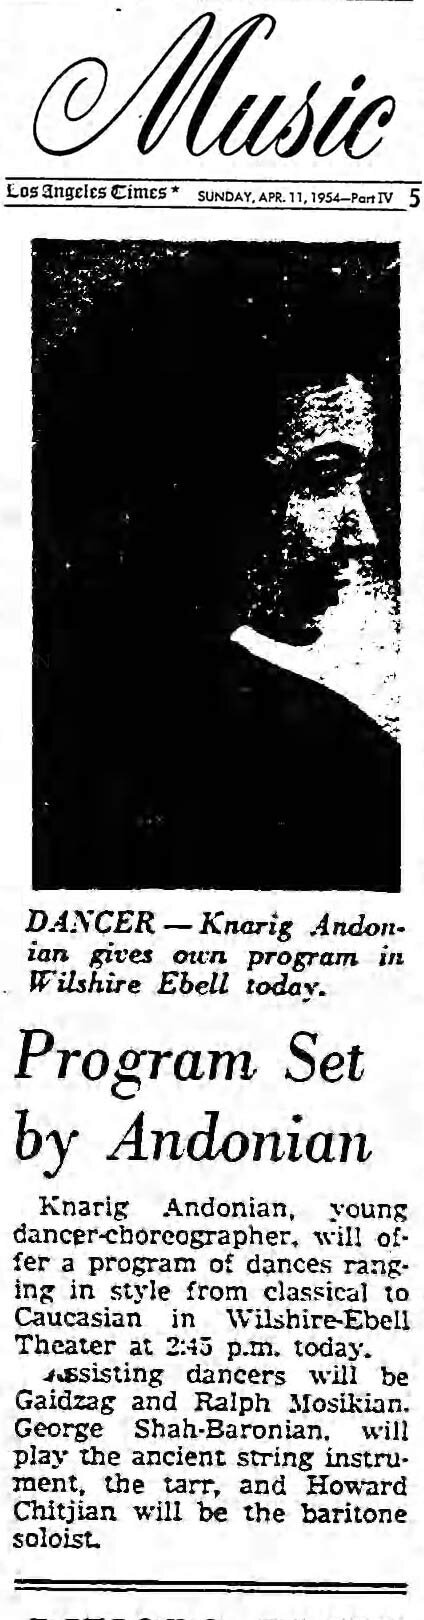  Listing for a performance of dancer Knarig Andonian accompanied on tar by George Shah-Baronian, in Sunday, April 11, 1954 issue of the Los Angeles Times (Image:  newspapers.com ) 